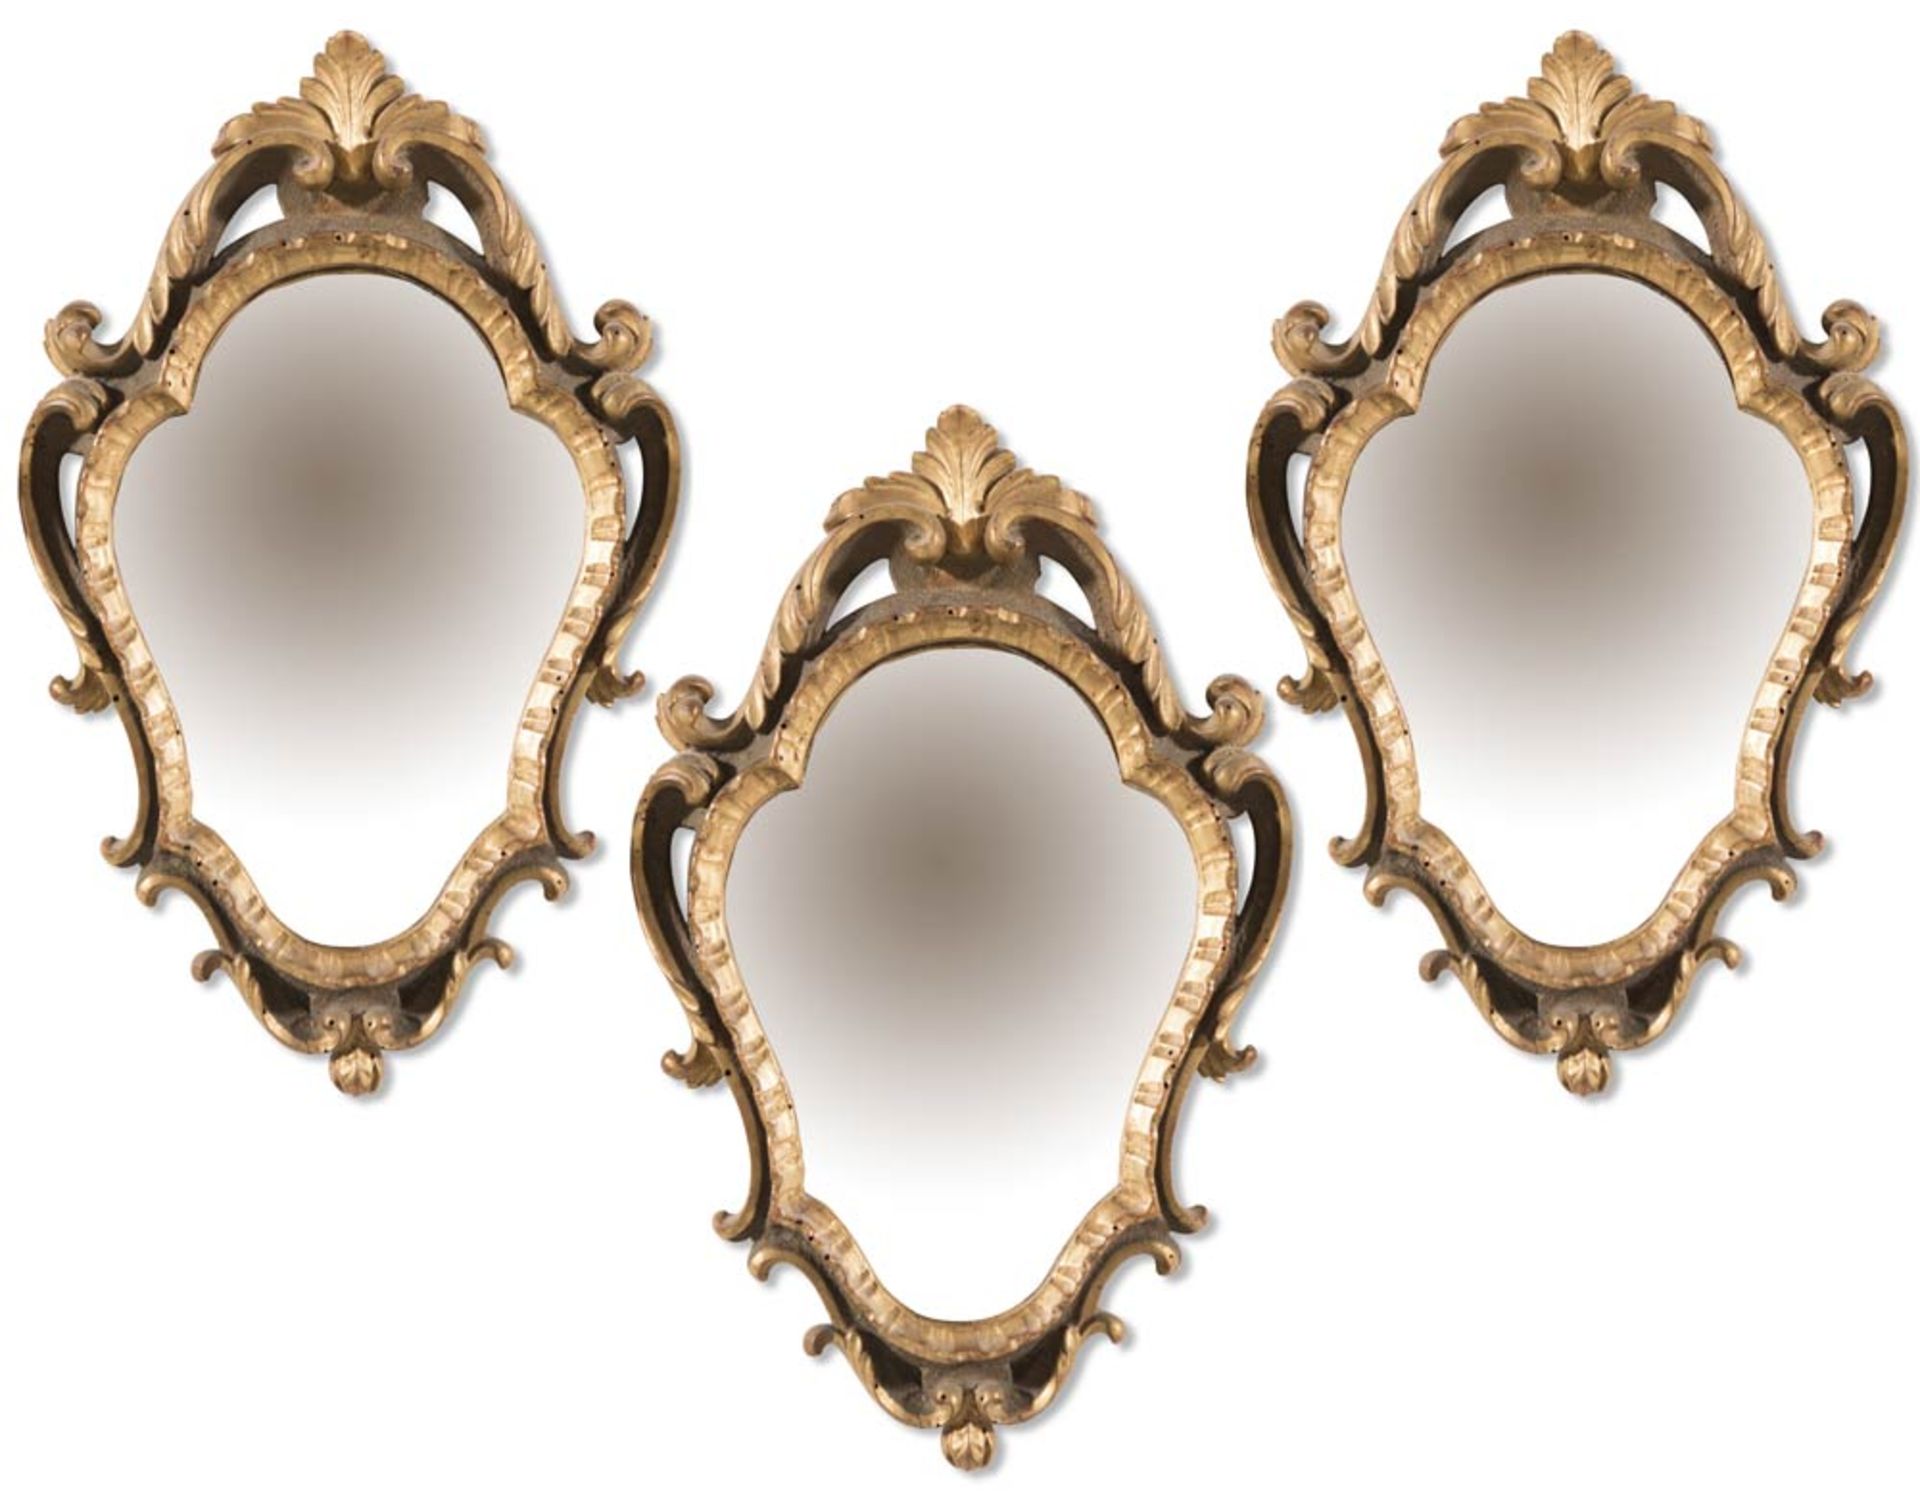 Three carved, partially lacquered ad gilt wood small mirrors, early 20th Century.